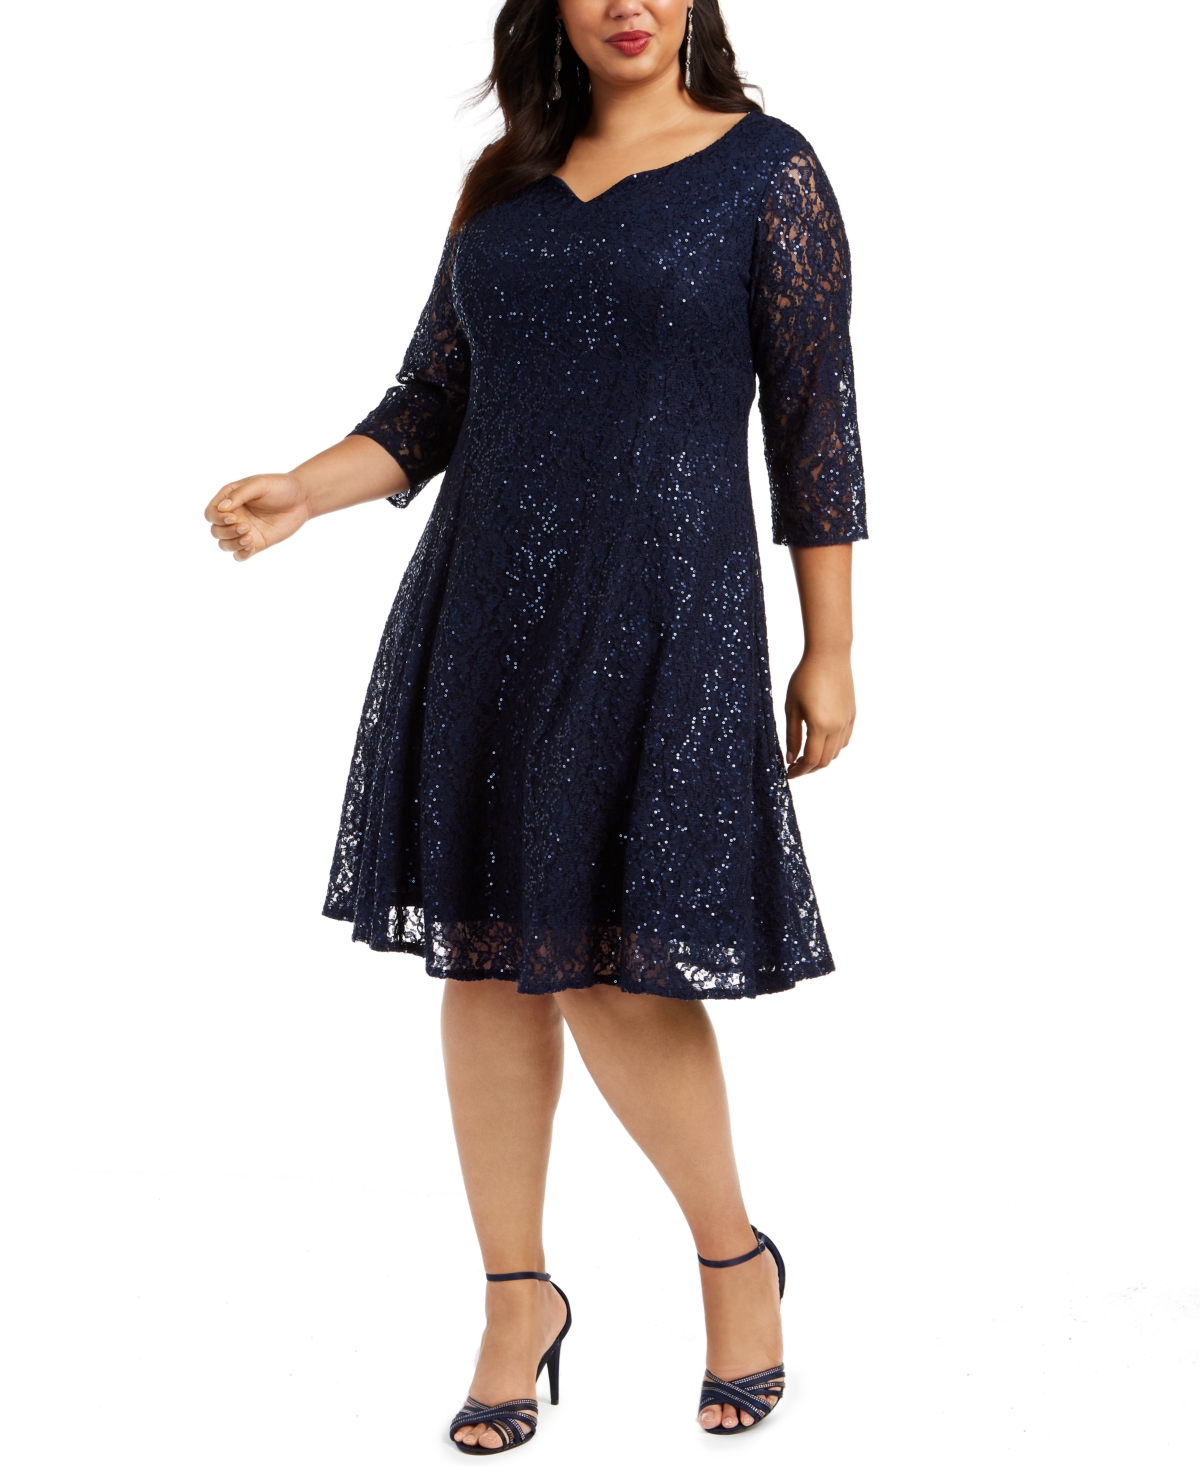 Plus Size Sequined Lace Dress - Navy